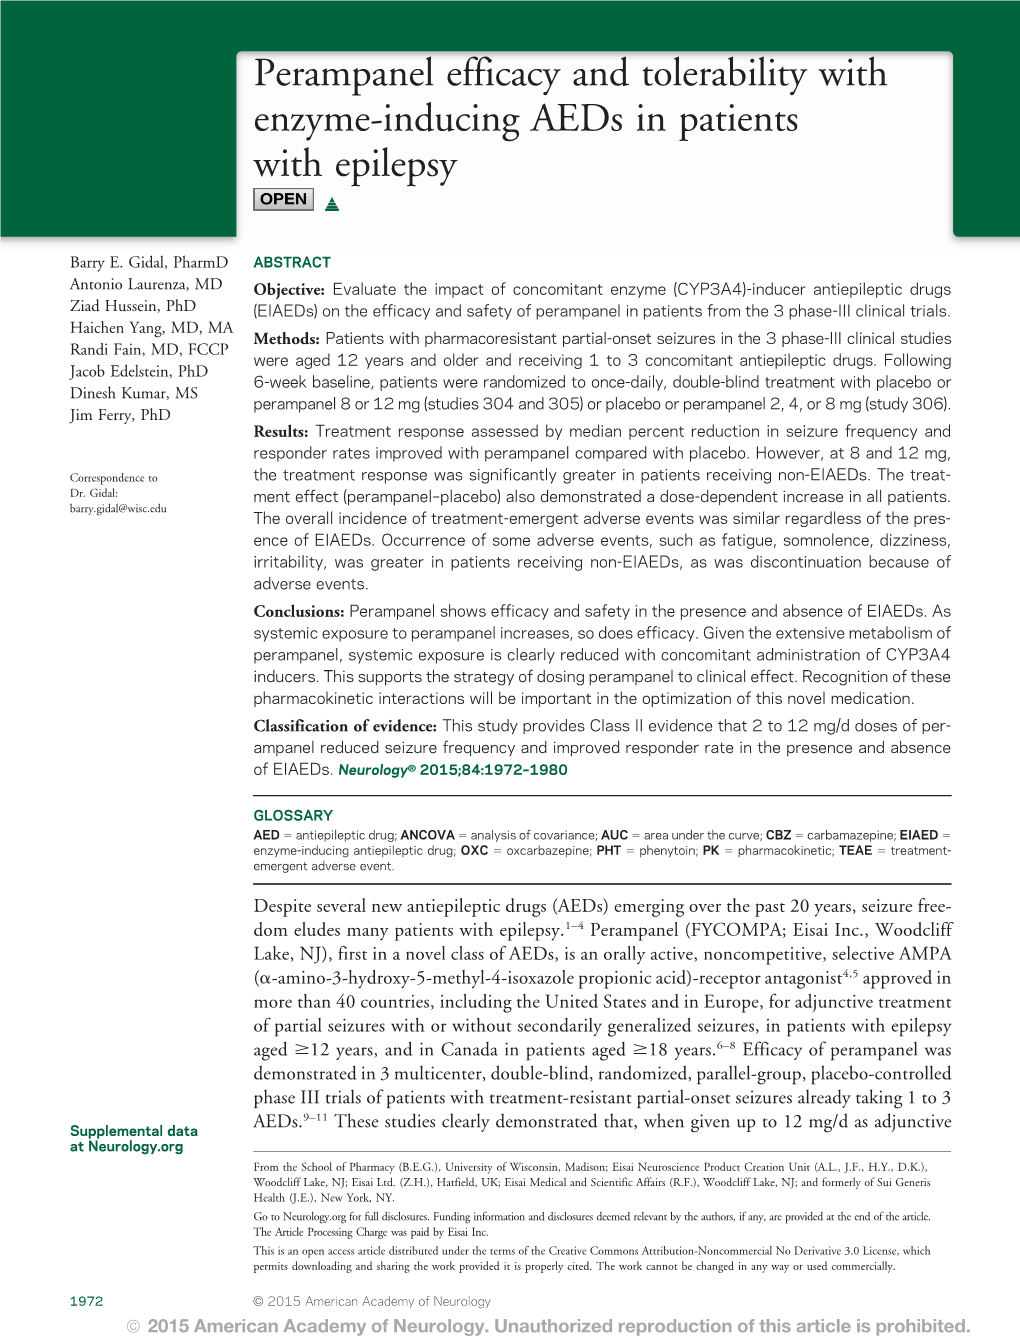 Perampanel Efficacy and Tolerability with Enzyme-Inducing Aeds in Patients with Epilepsy